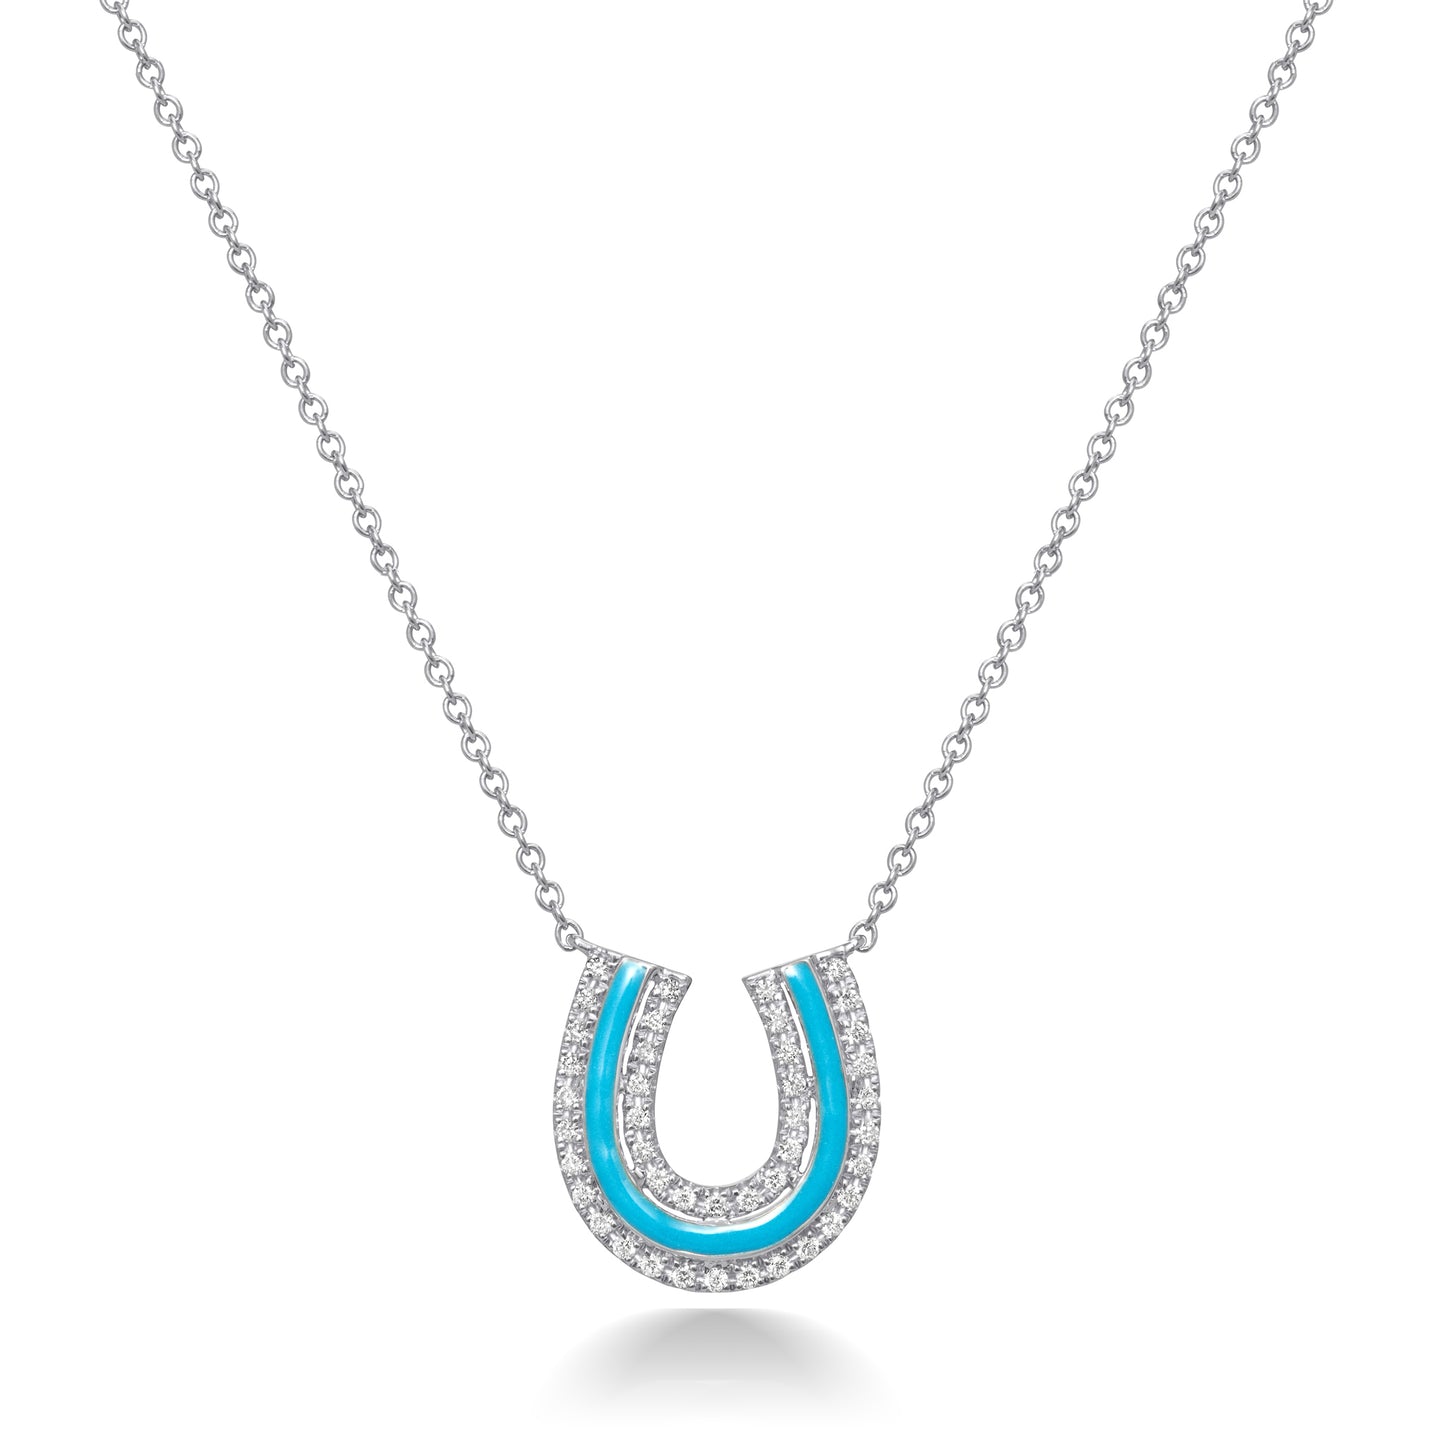 Lucky Horseshoe Necklace in Blue Enamel and Diamonds